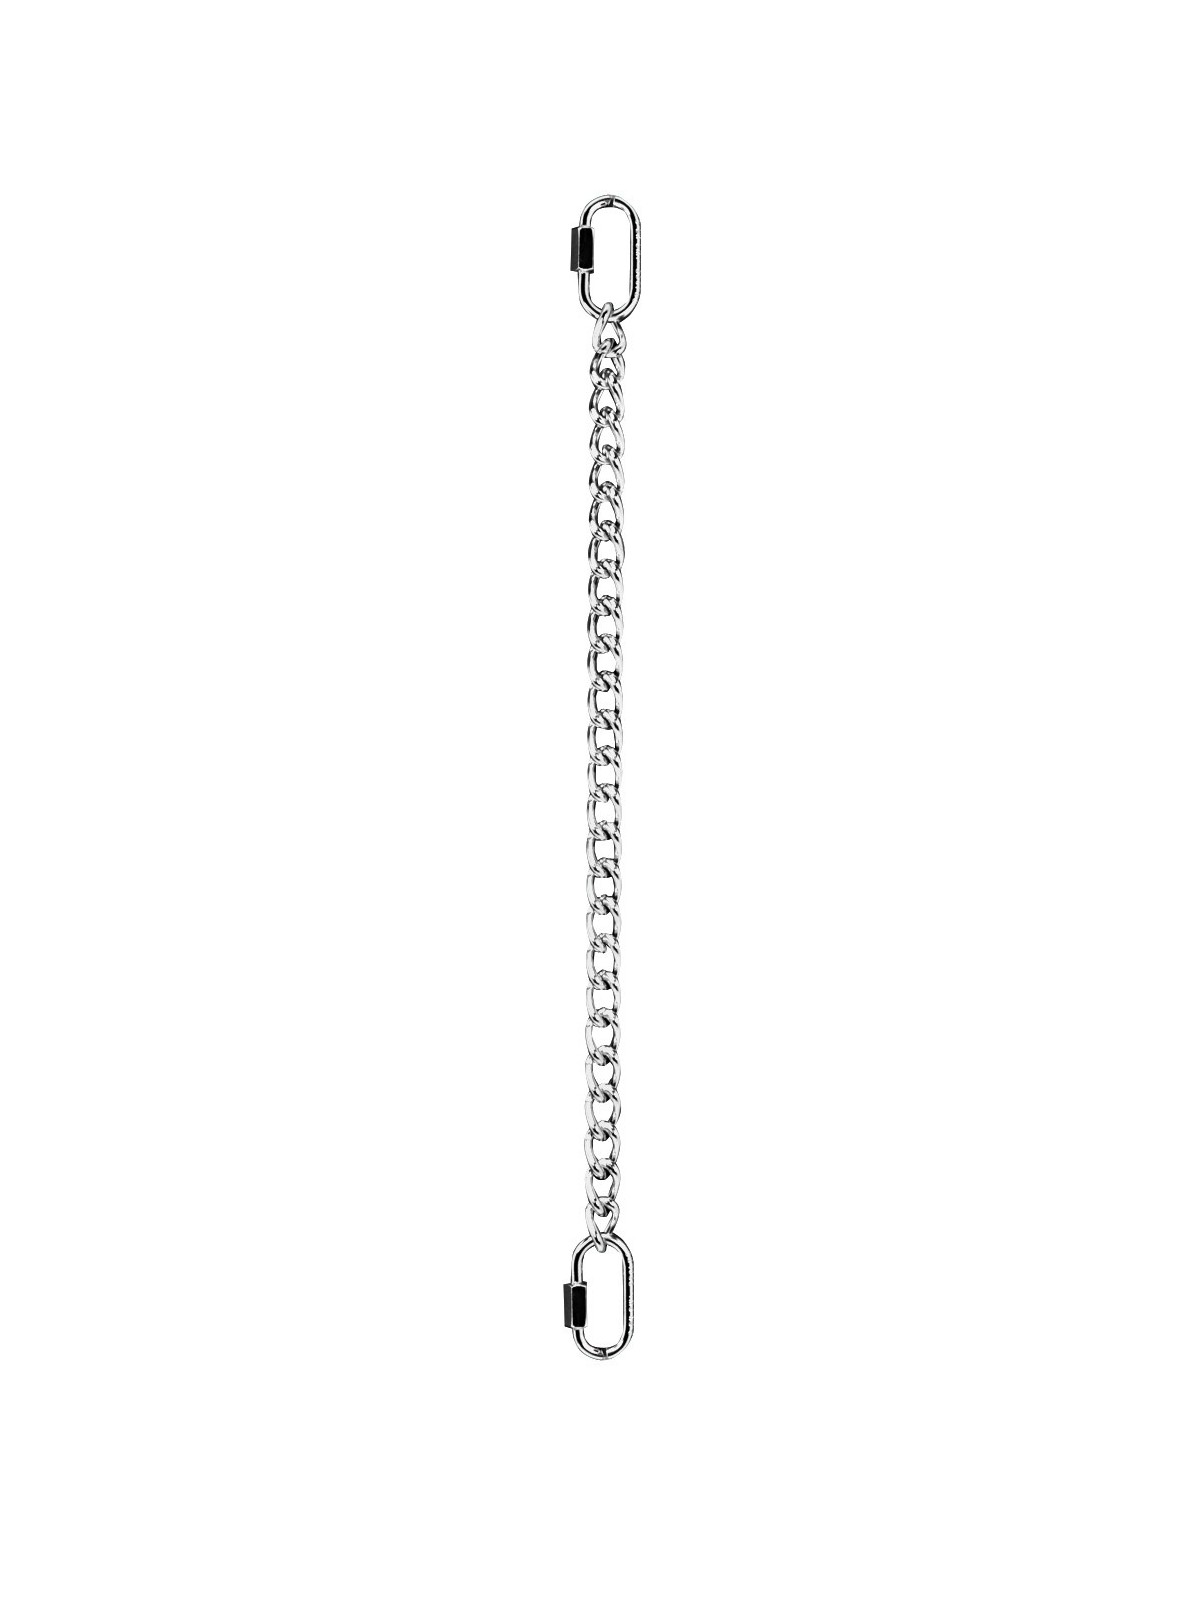 Rein Chains, Chain Style for Romal Reins 50-1001